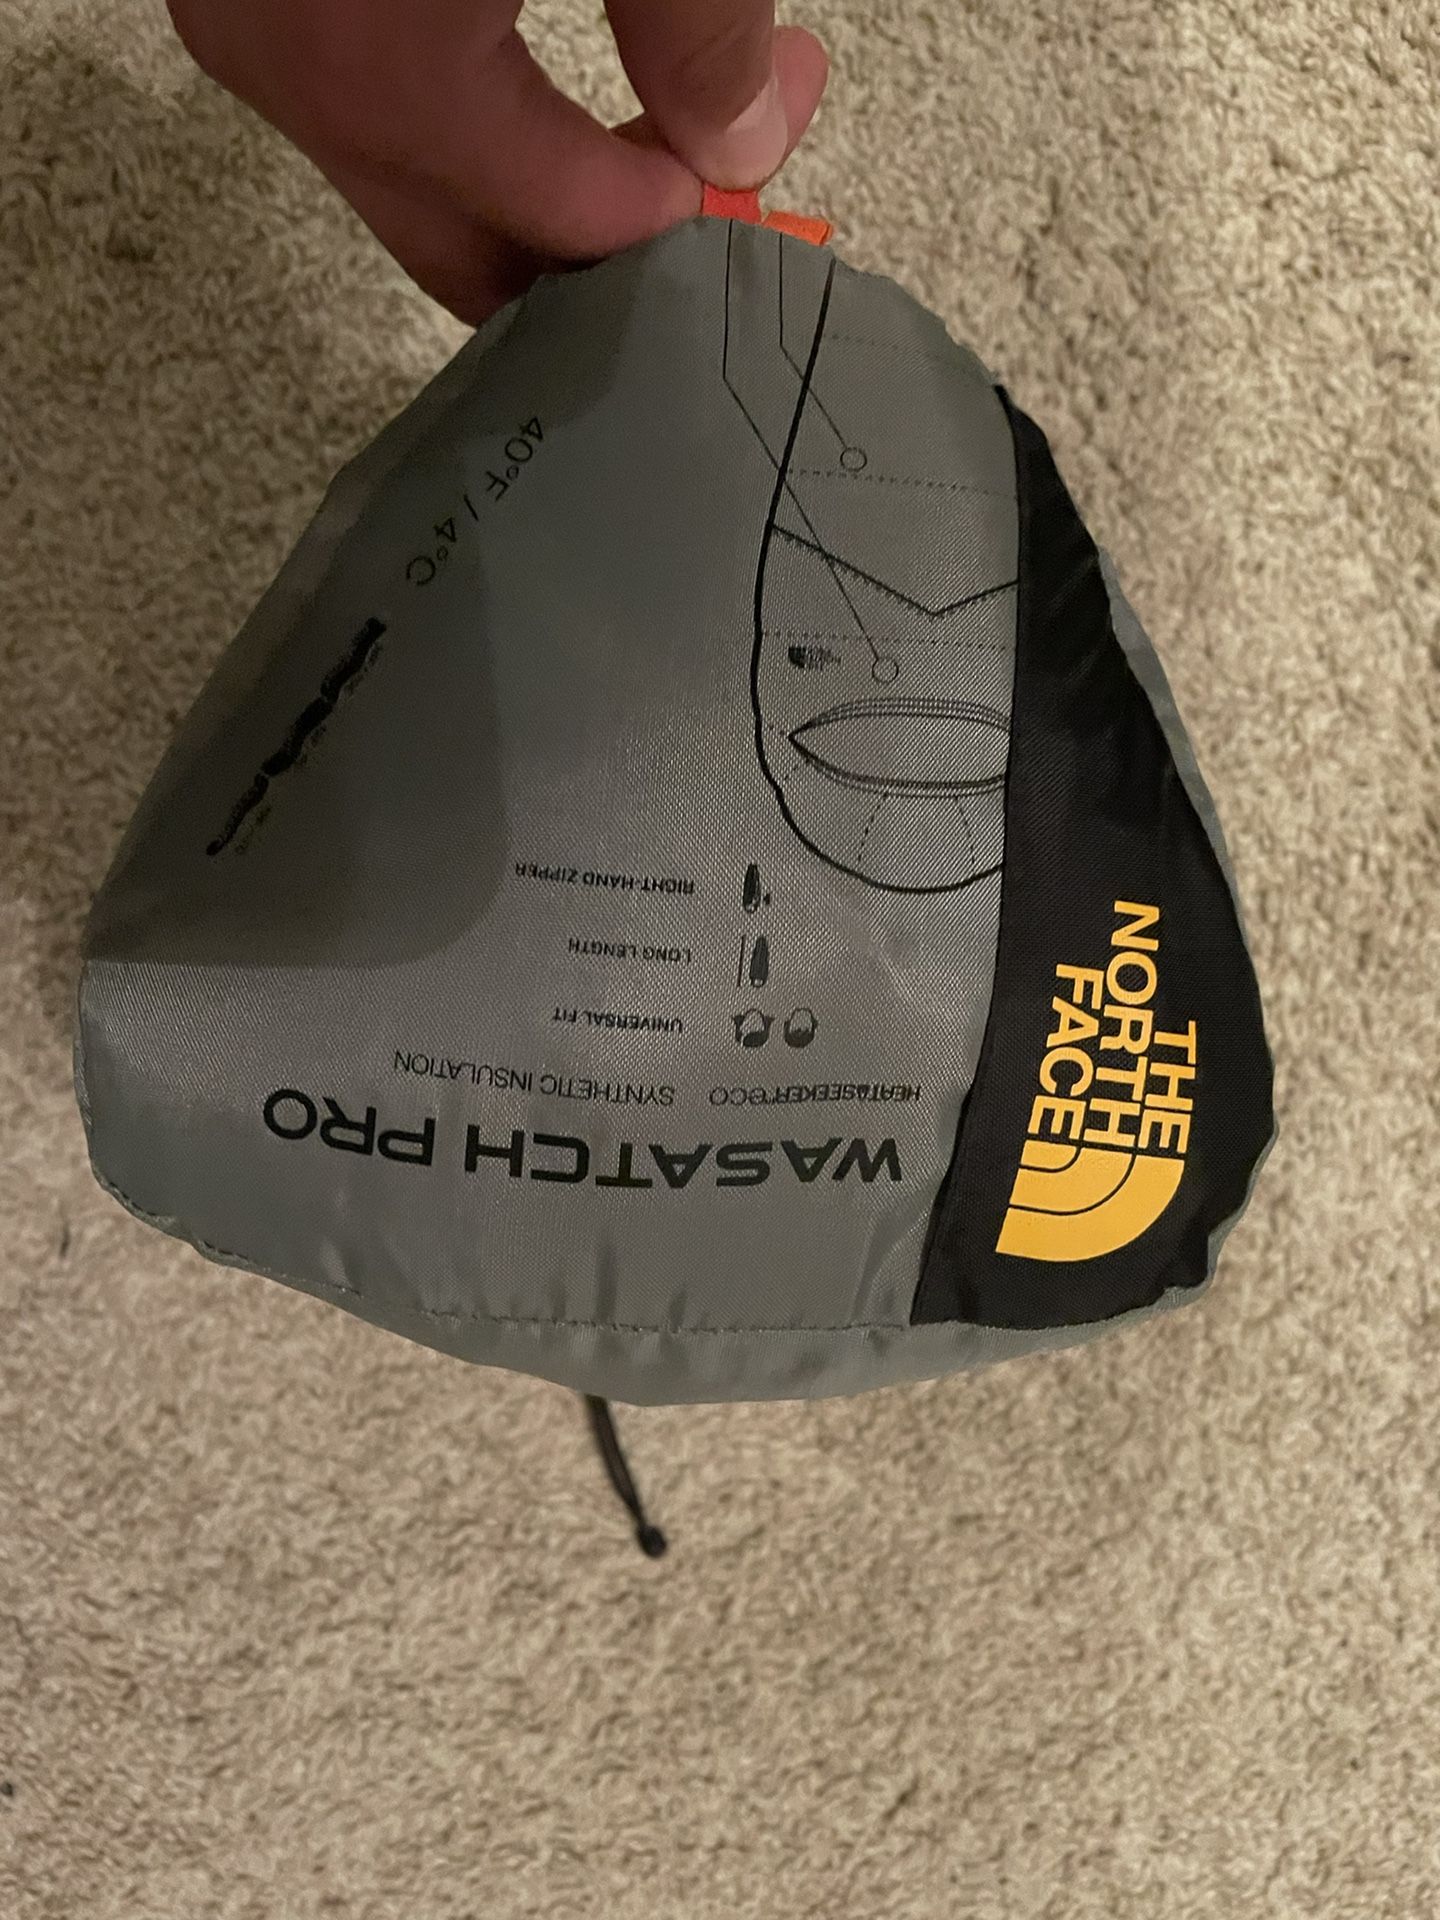 North Face wasatch pro 40 sleeping bag